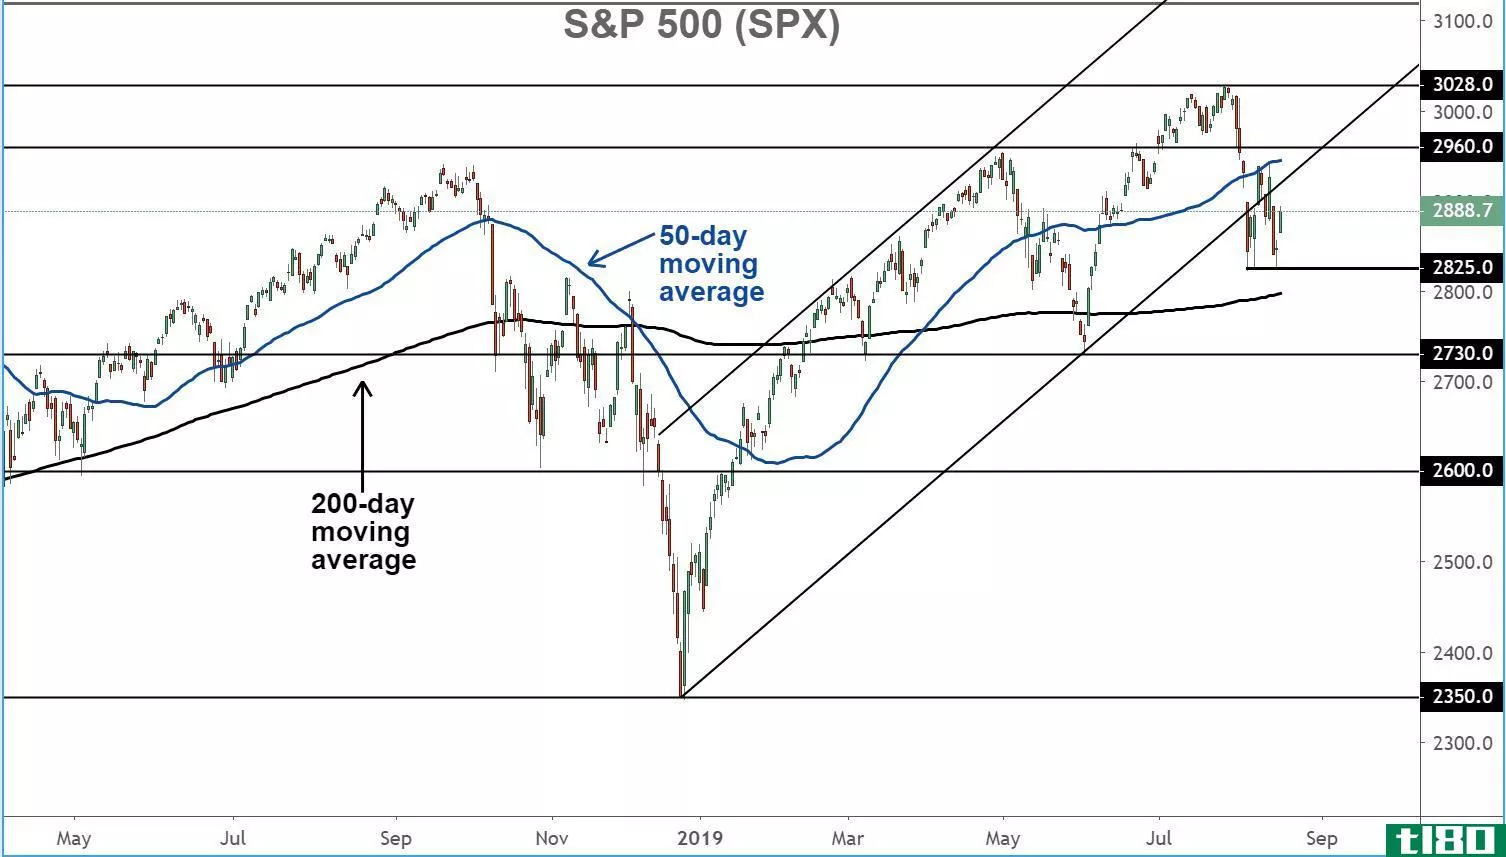 Chart showing the performance of the S&P 500 Index